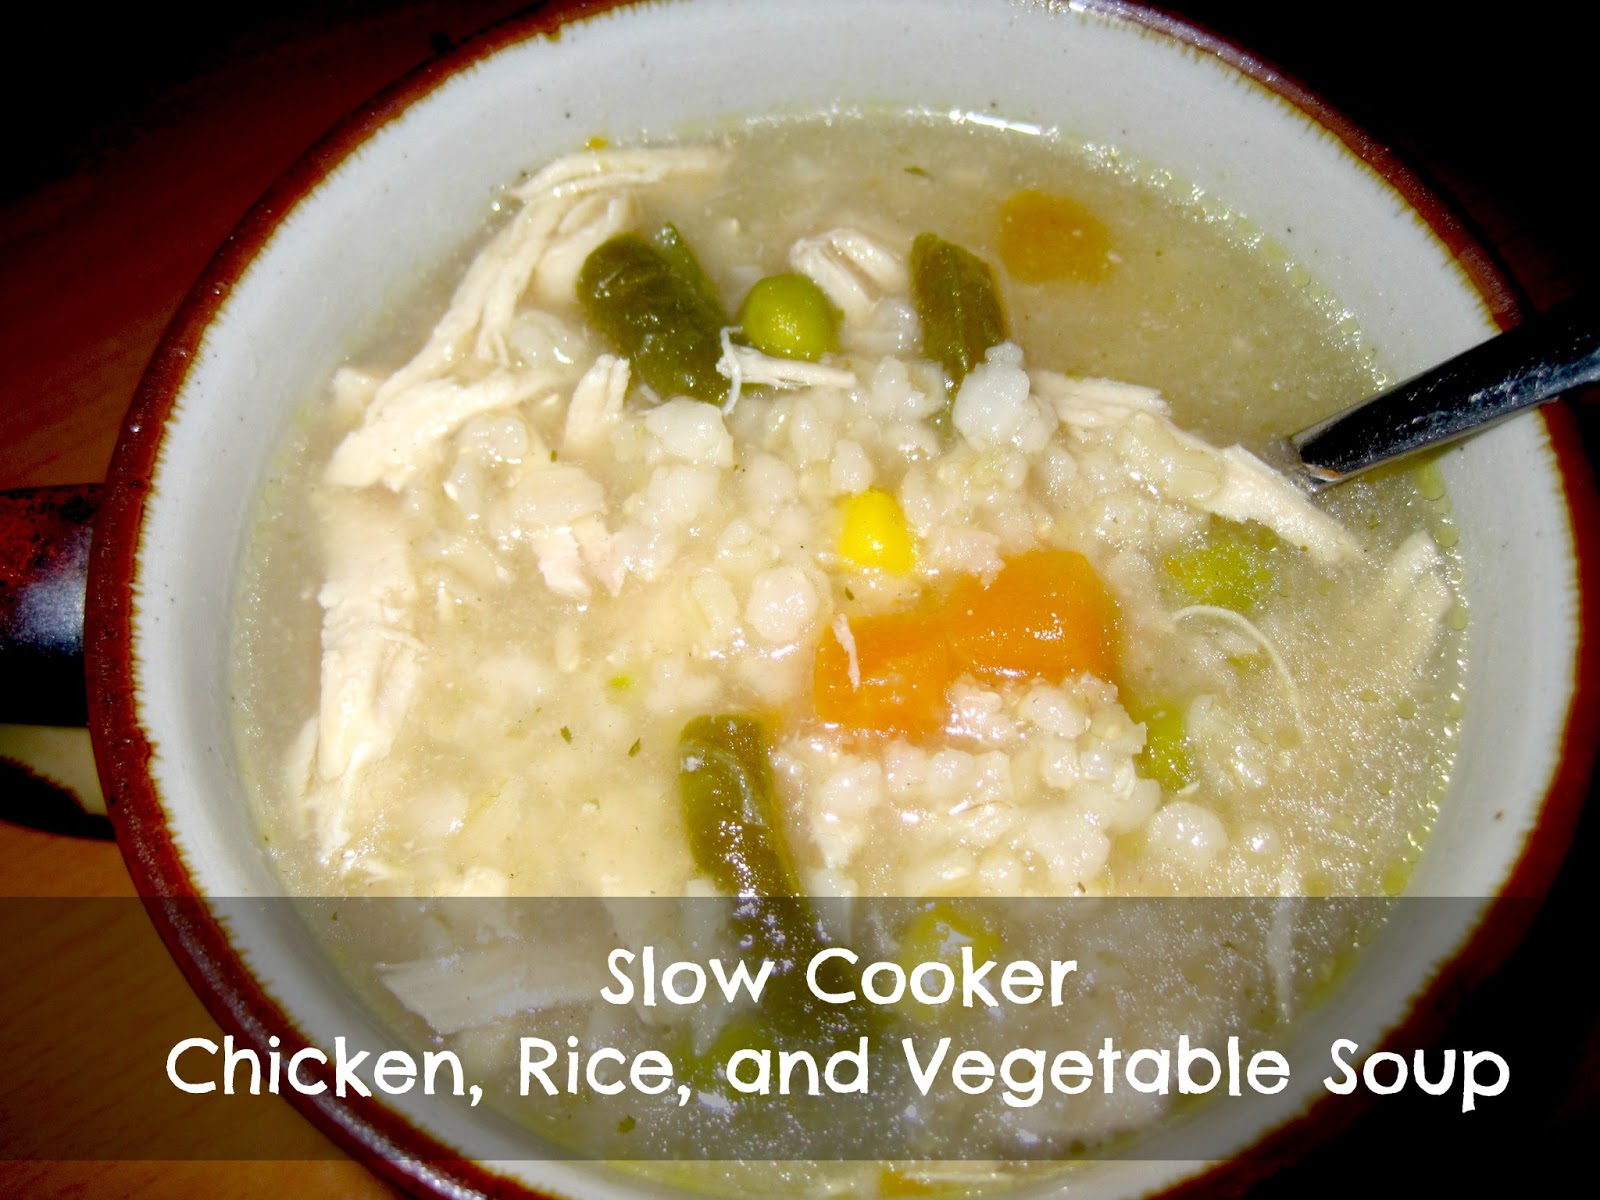 The Healthy Crafty Foodie: Slow Cooker Chicken, Rice, and Vegetable Soup